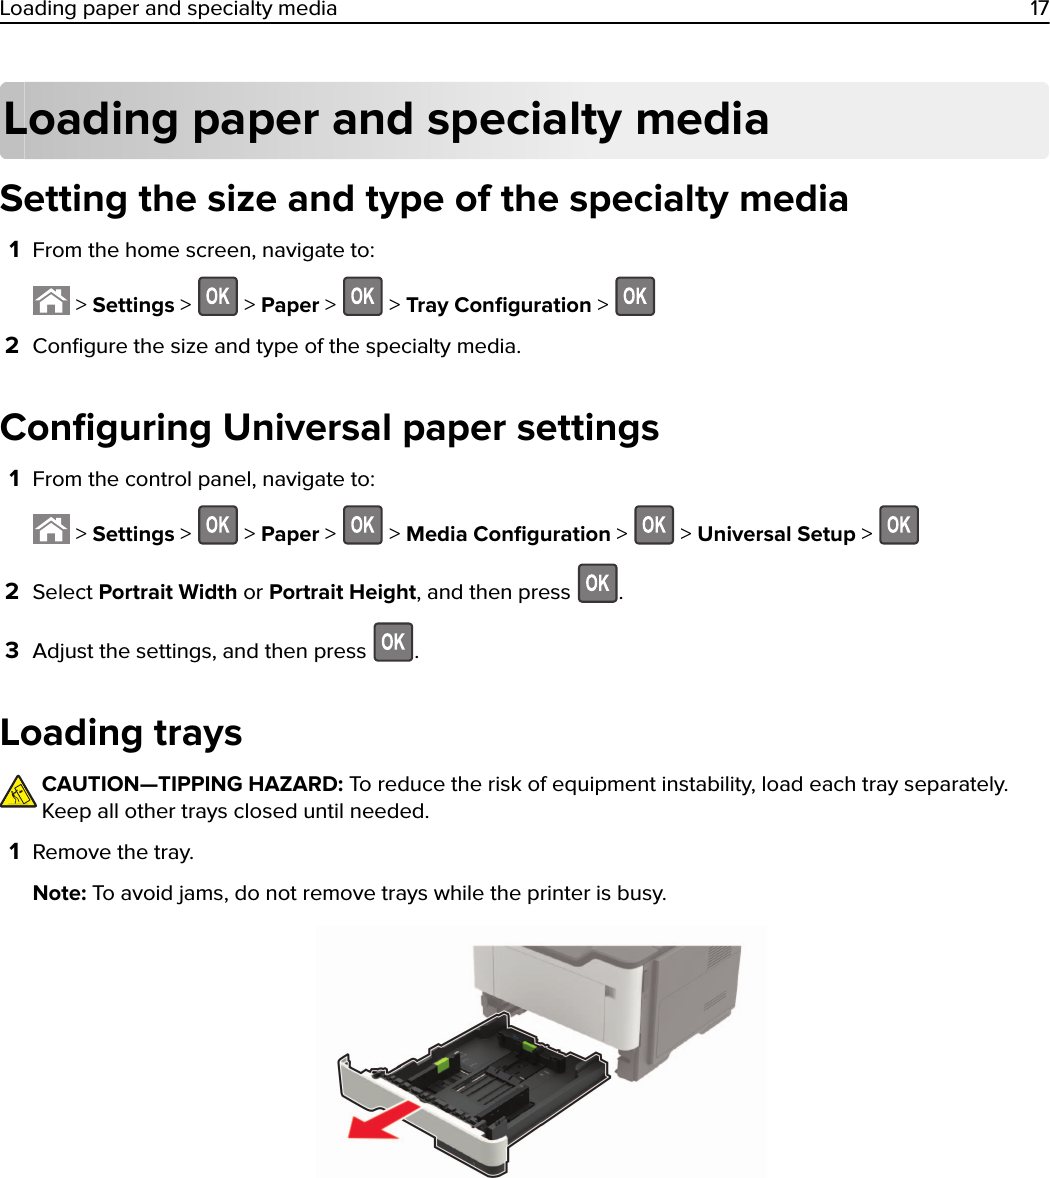 Loading paper and specialty mediaSetting the size and type of the specialty media1From the home screen, navigate to: &gt; Settings &gt;   &gt; Paper &gt;   &gt; Tray Conﬁguration &gt; 2Conﬁgure the size and type of the specialty media.Conﬁguring Universal paper settings1From the control panel, navigate to: &gt; Settings &gt;   &gt; Paper &gt;   &gt; Media Conﬁguration &gt;   &gt; Universal Setup &gt; 2Select Portrait Width or Portrait Height, and then press  .3Adjust the settings, and then press  .Loading traysCAUTION—TIPPING HAZARD: To reduce the risk of equipment instability, load each tray separately.Keep all other trays closed until needed.1Remove the tray.Note: To avoid jams, do not remove trays while the printer is busy.Loading paper and specialty media 17